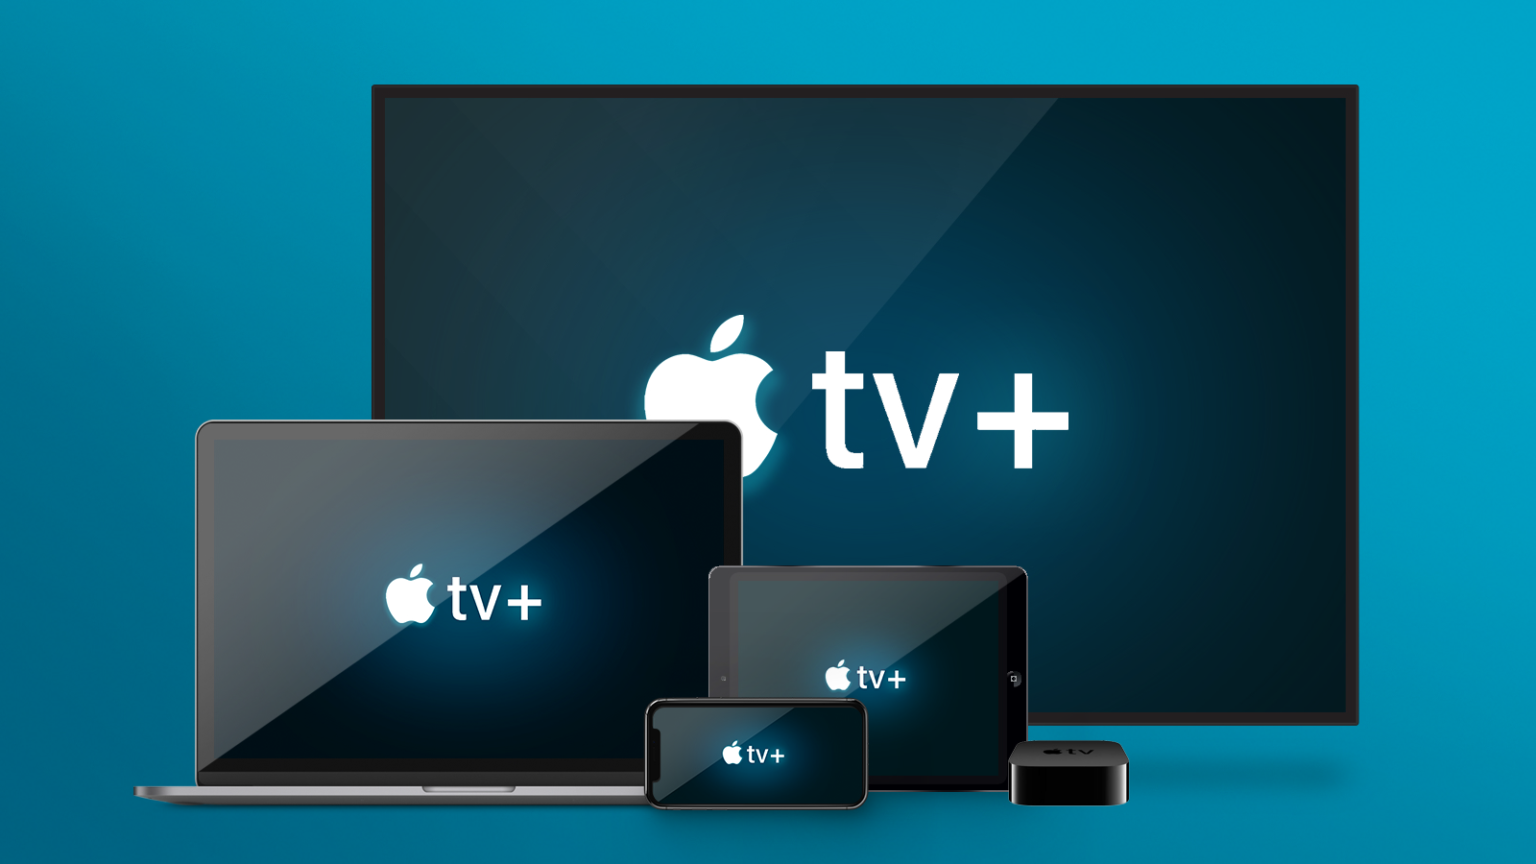 Apple TV+ Bundles Up CBS All Access and Showtime for a Great Price